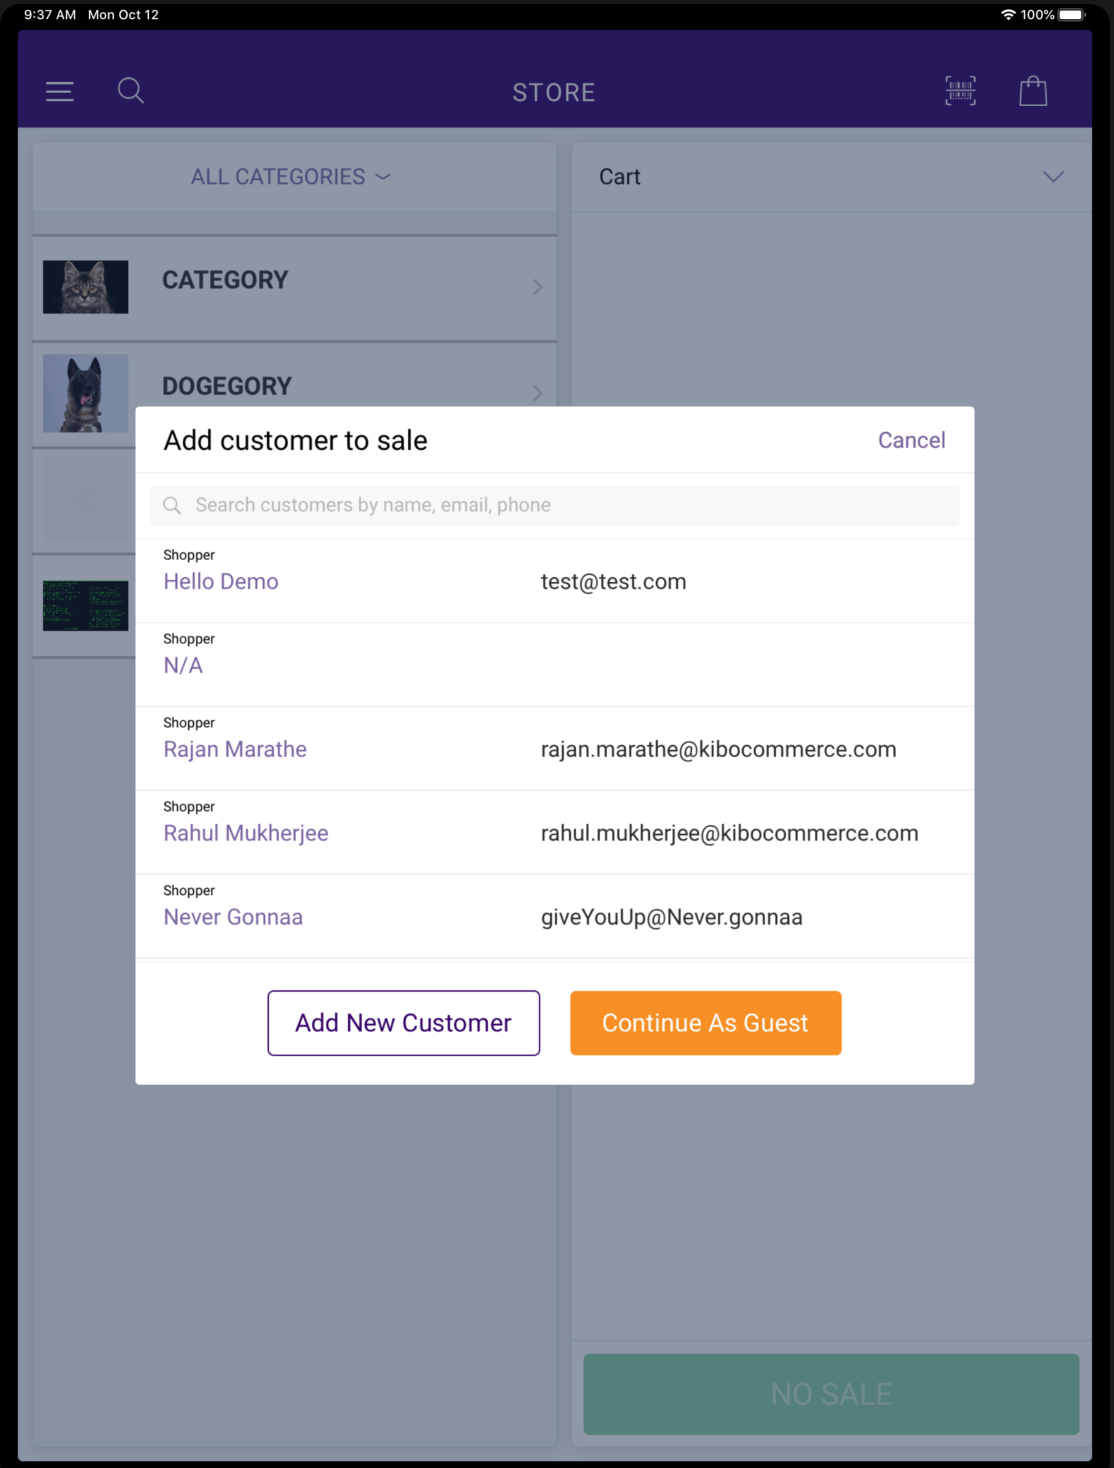 Pop-up prompting the user to search for a customer, add a new one, or continue as guest